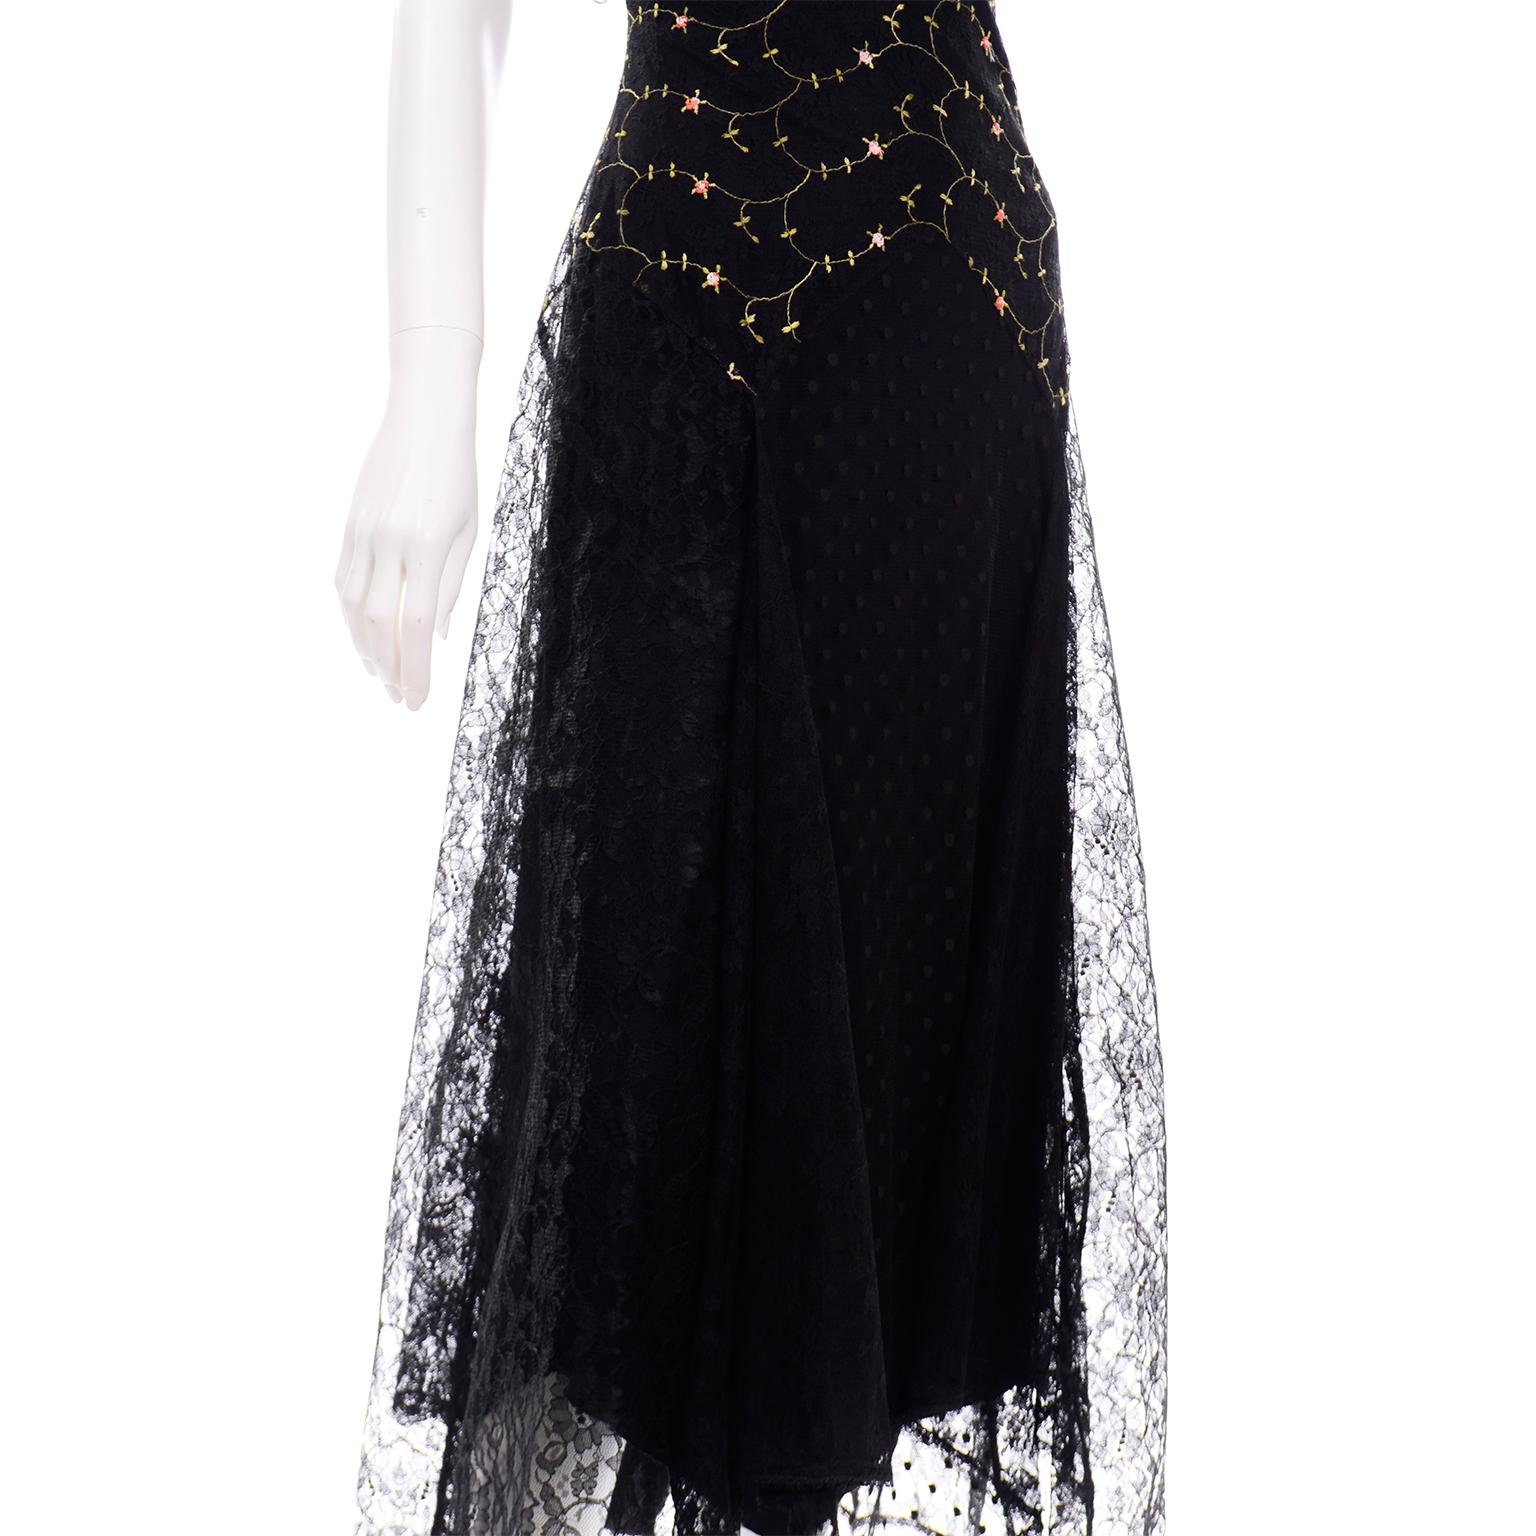 Women's 1990s Betsey Johnson Black Dot Lace Vintage Evening Dress w Floral Embroidery